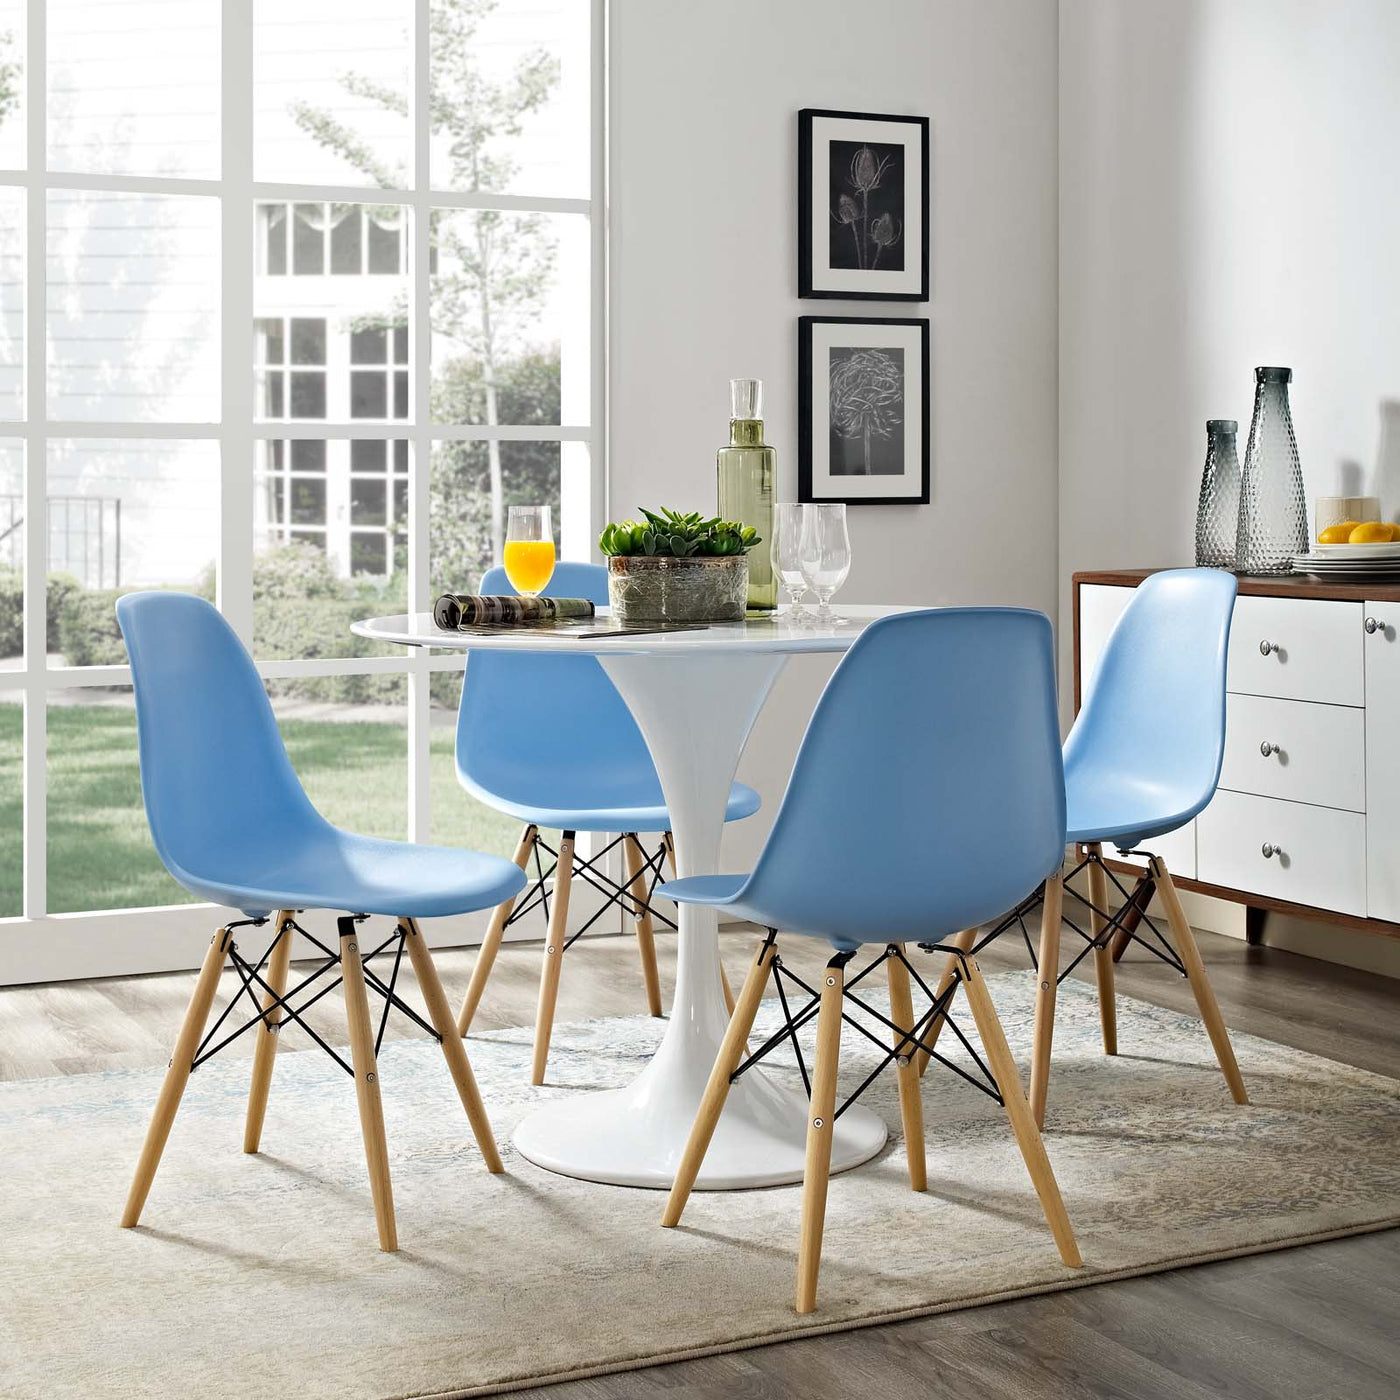 Pyramid Dining Side Chair